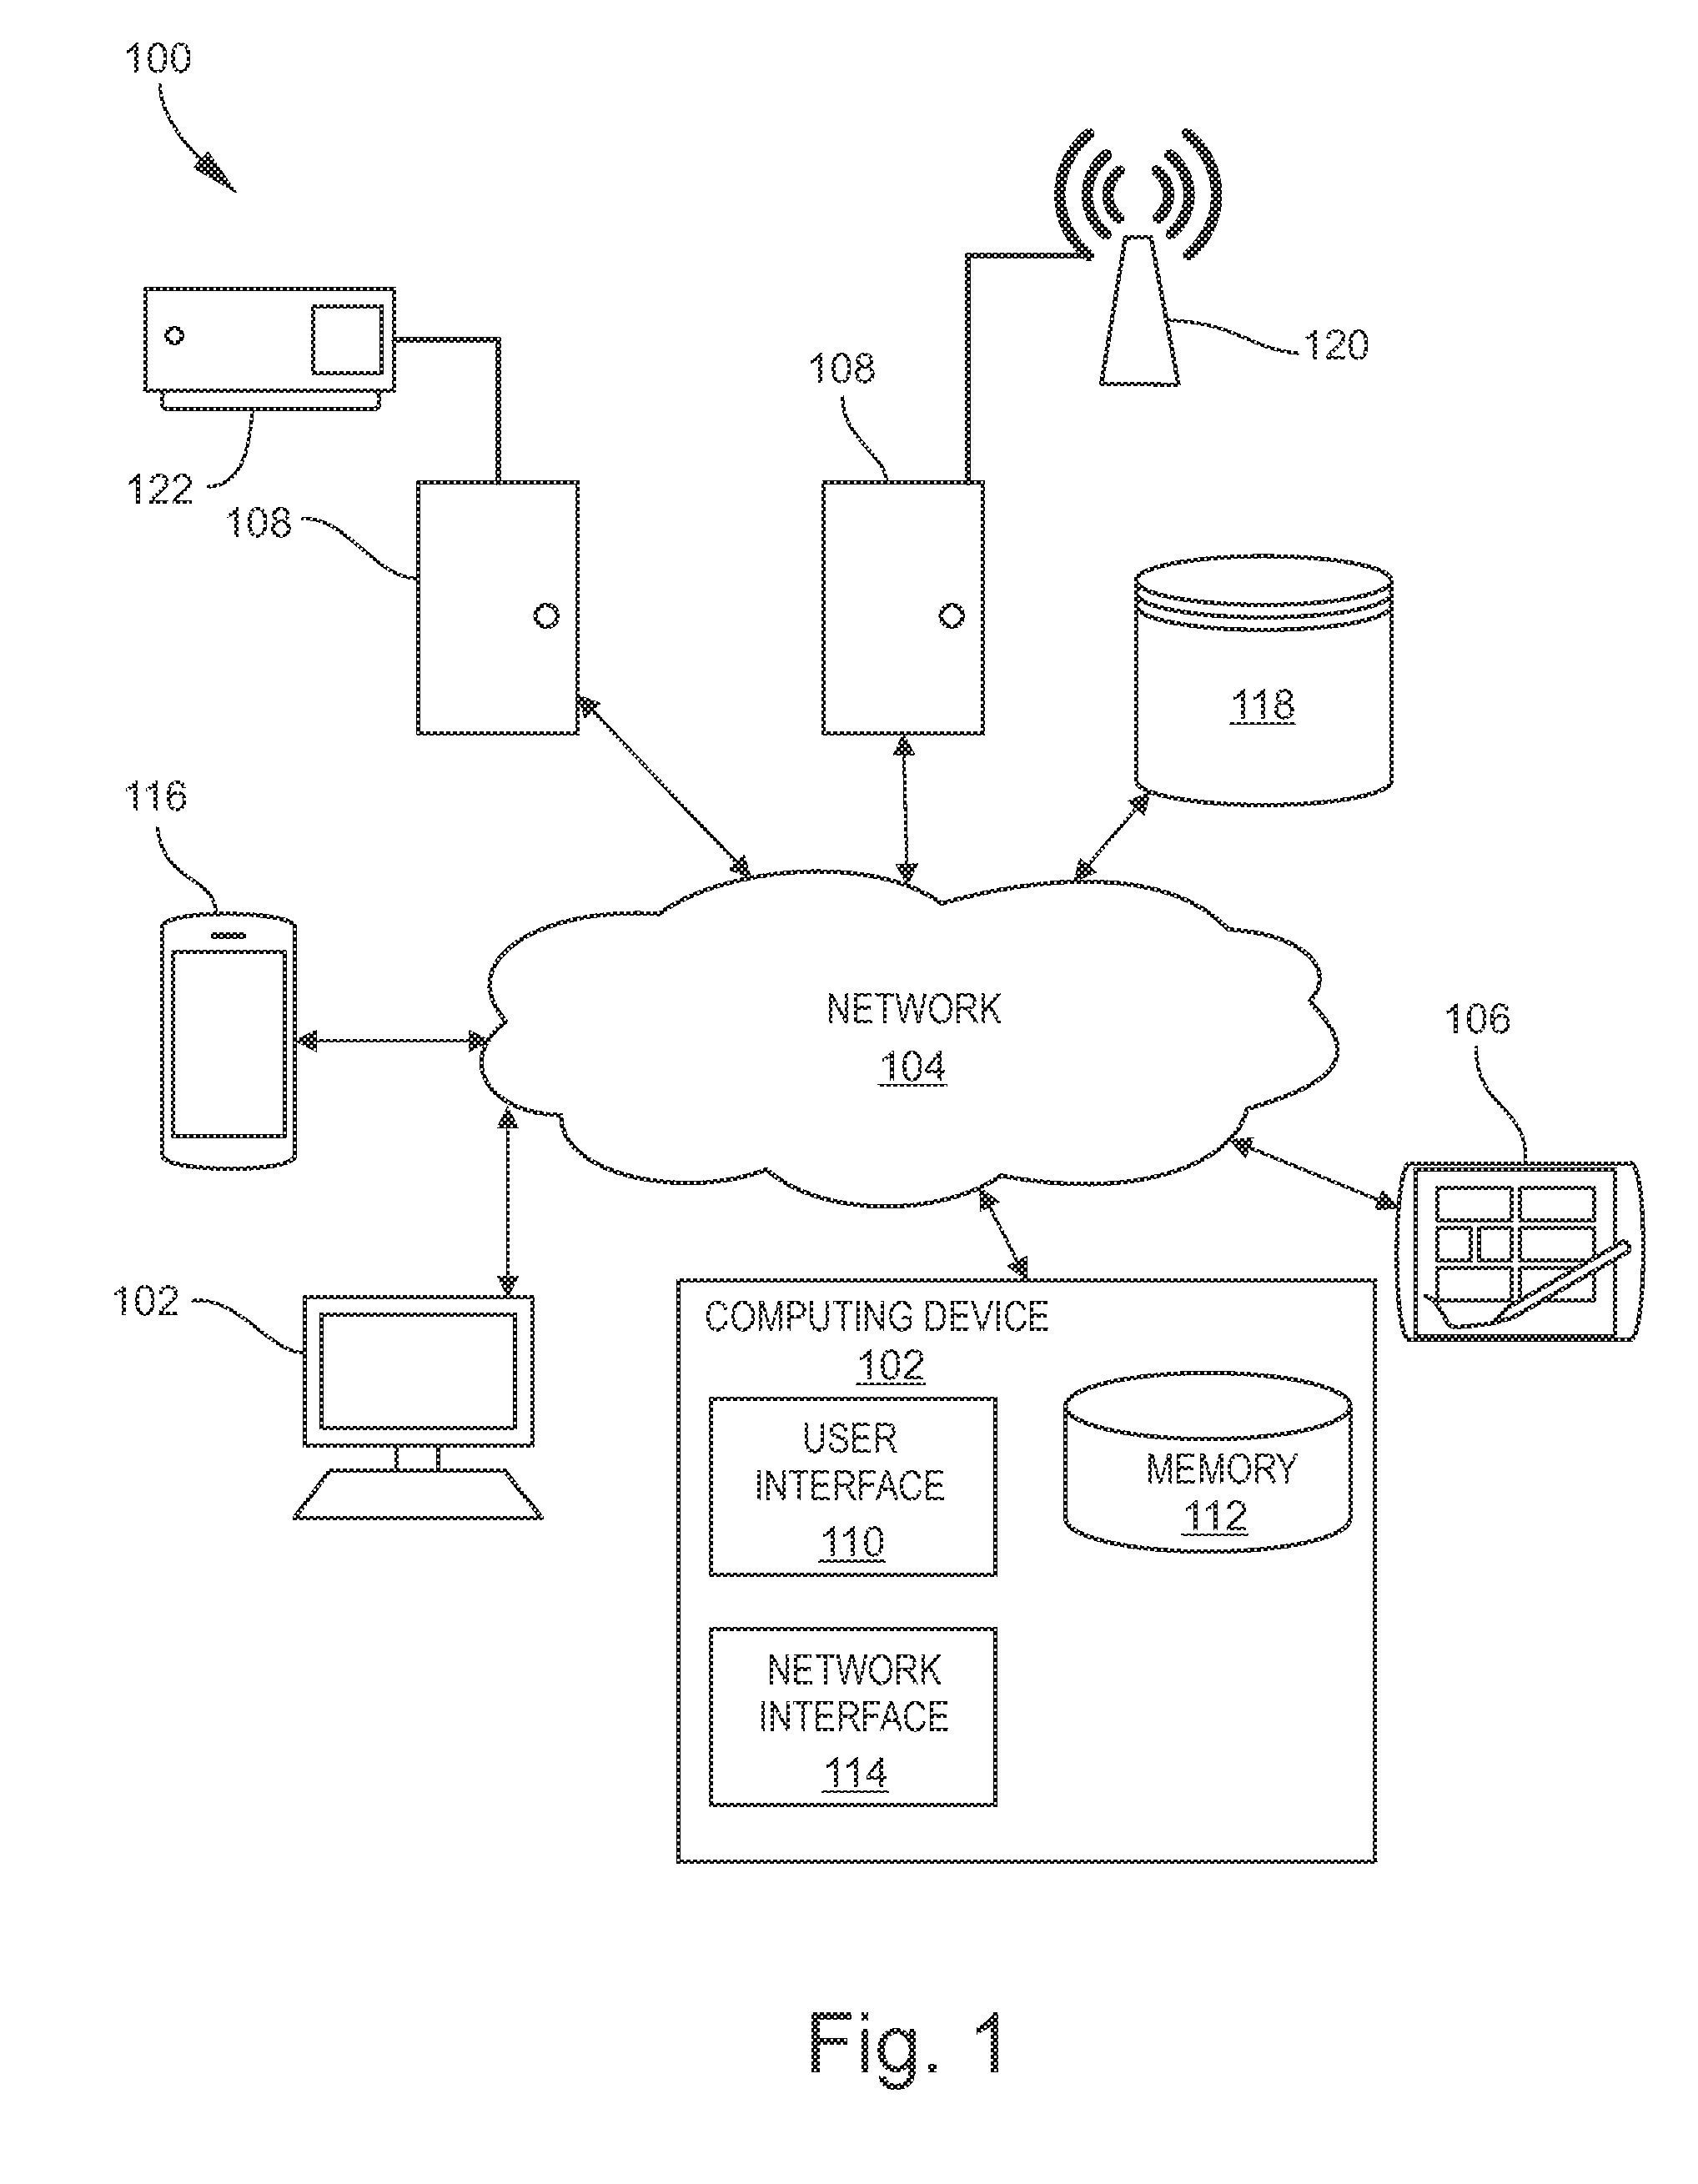 Resource advisor for automated bare-metal operating system installation